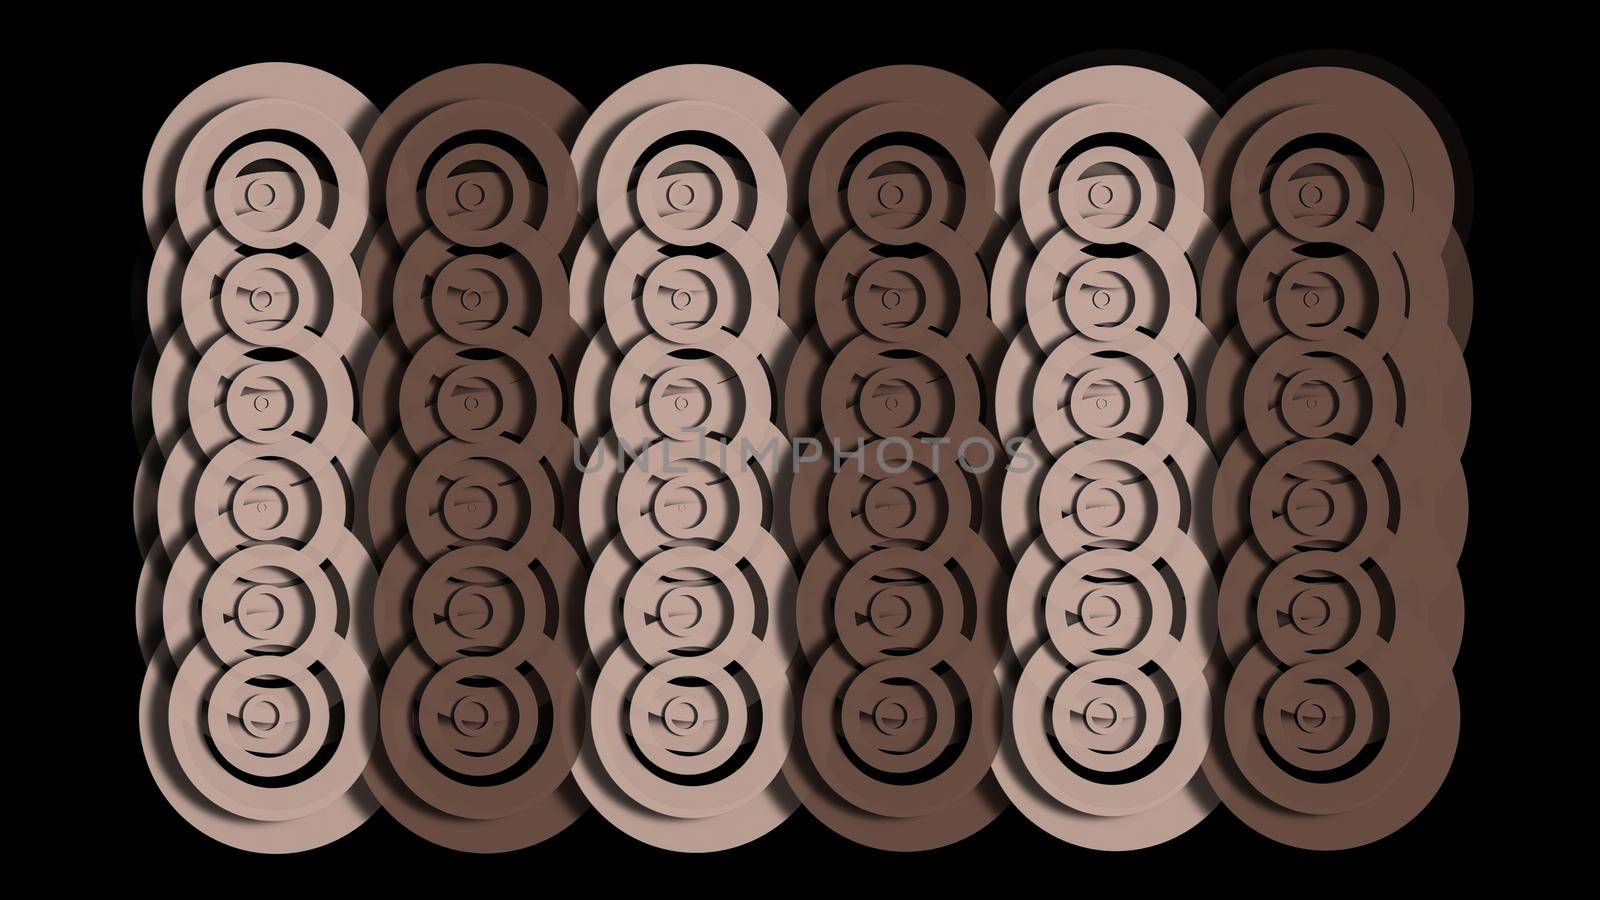 3d illustration - Abstract hypnotic  circle  background - psychedelic optical illusion by vitanovski